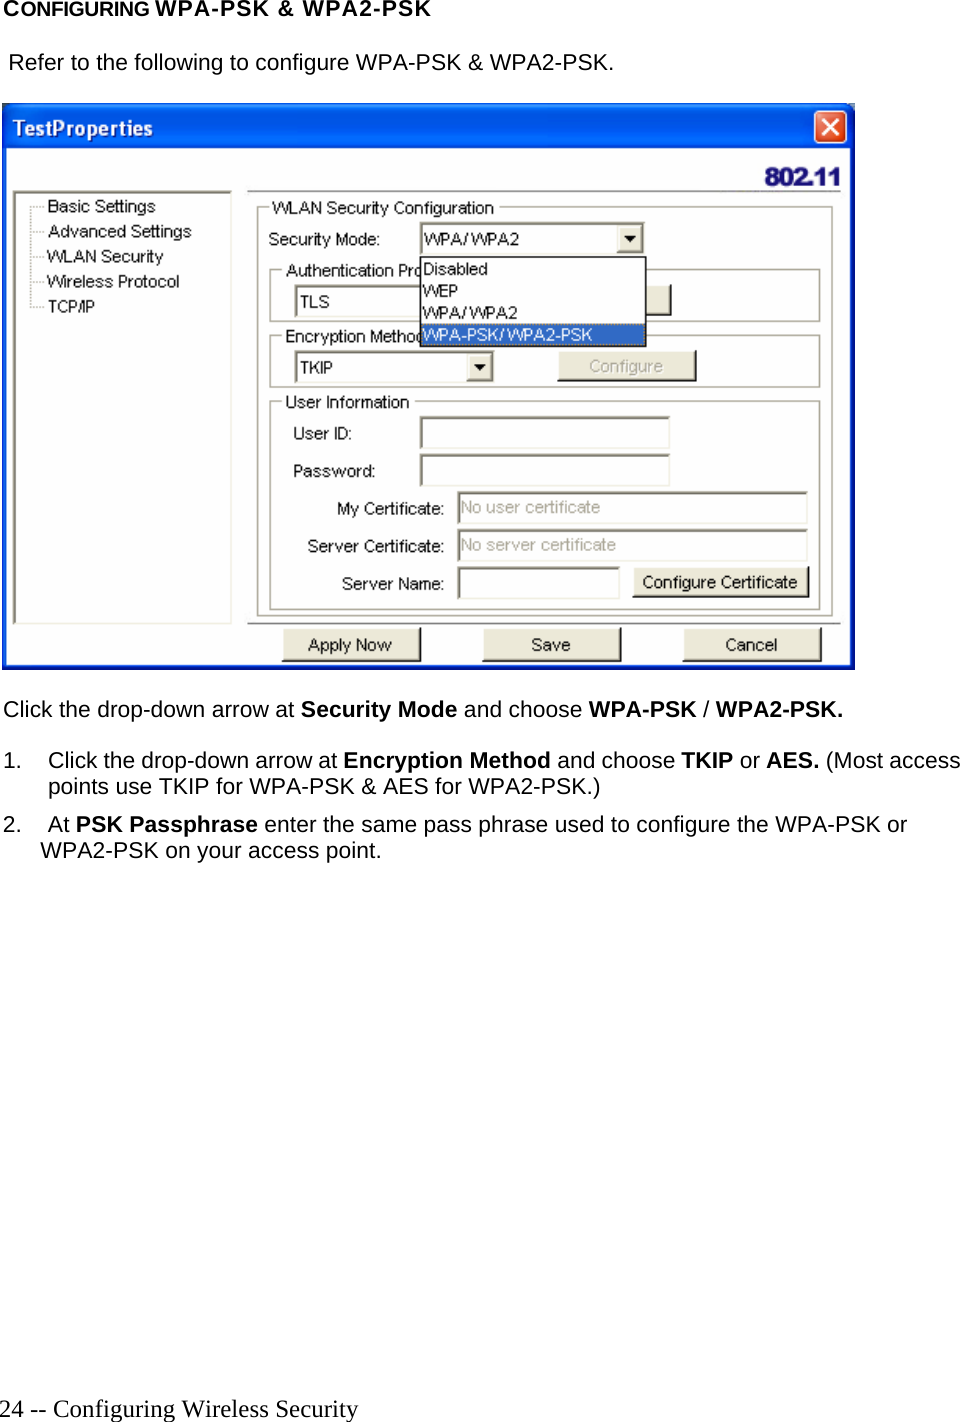   24 -- Configuring Wireless Security CONFIGURING WPA-PSK &amp; WPA2-PSK   Refer to the following to configure WPA-PSK &amp; WPA2-PSK.  Click the drop-down arrow at Security Mode and choose WPA-PSK / WPA2-PSK. 1.  Click the drop-down arrow at Encryption Method and choose TKIP or AES. (Most access points use TKIP for WPA-PSK &amp; AES for WPA2-PSK.) 2. At PSK Passphrase enter the same pass phrase used to configure the WPA-PSK or     WPA2-PSK on your access point.   